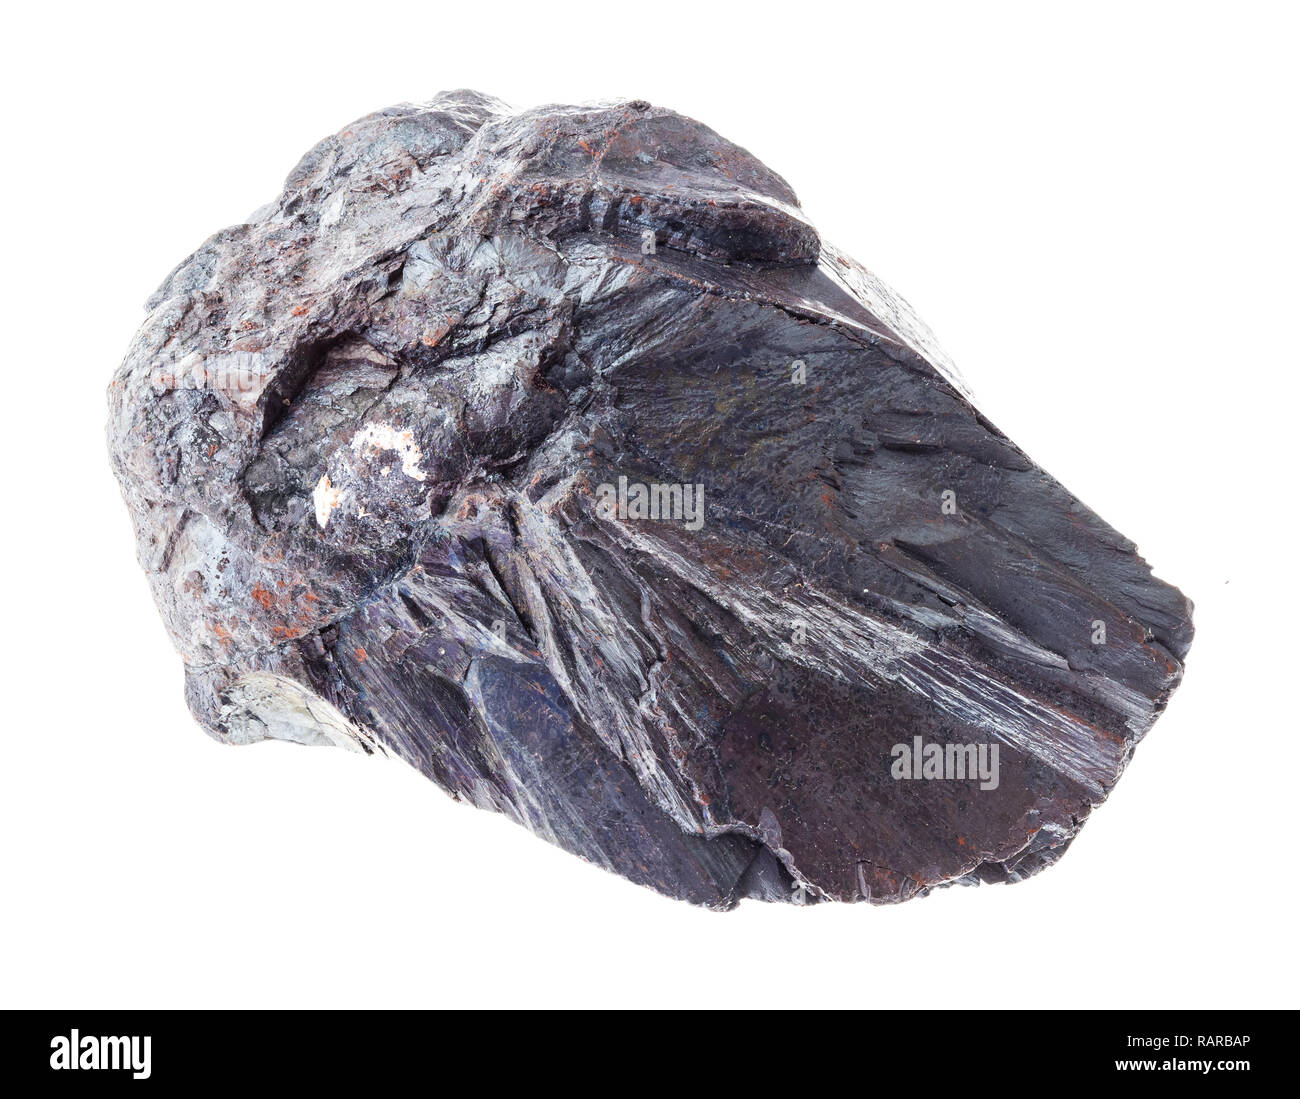 macro photography of natural mineral from geological collection - rough hematite stone (iron ore) on white background Stock Photo